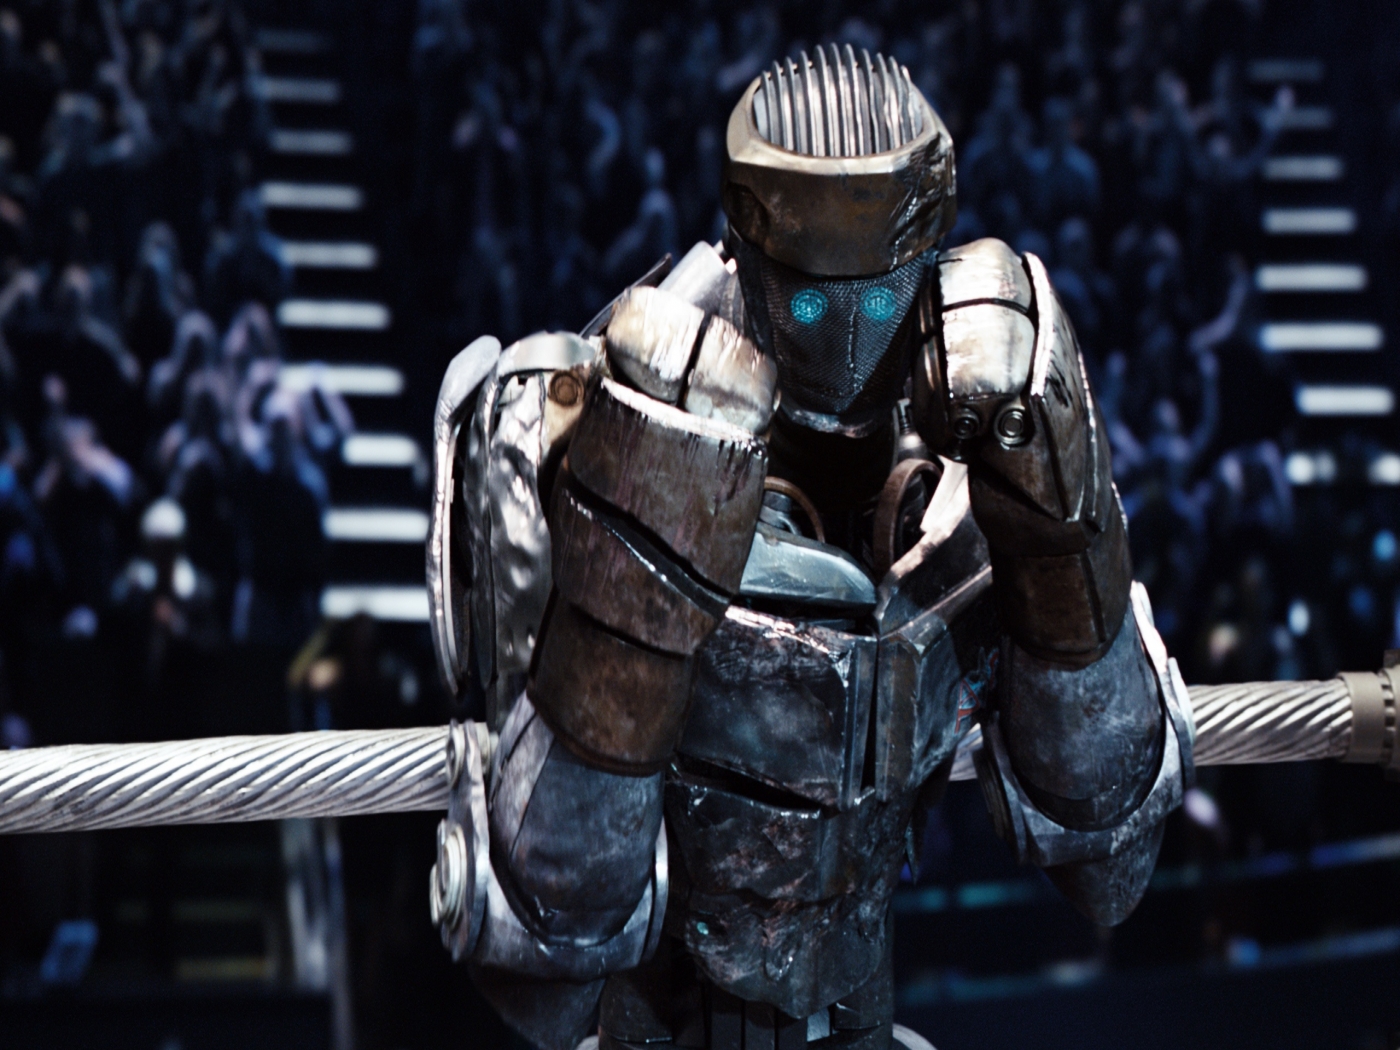 40 Atom Real Steel Wallpaper On Wallpapersafari Download, share or upload your own one! 40 atom real steel wallpaper on